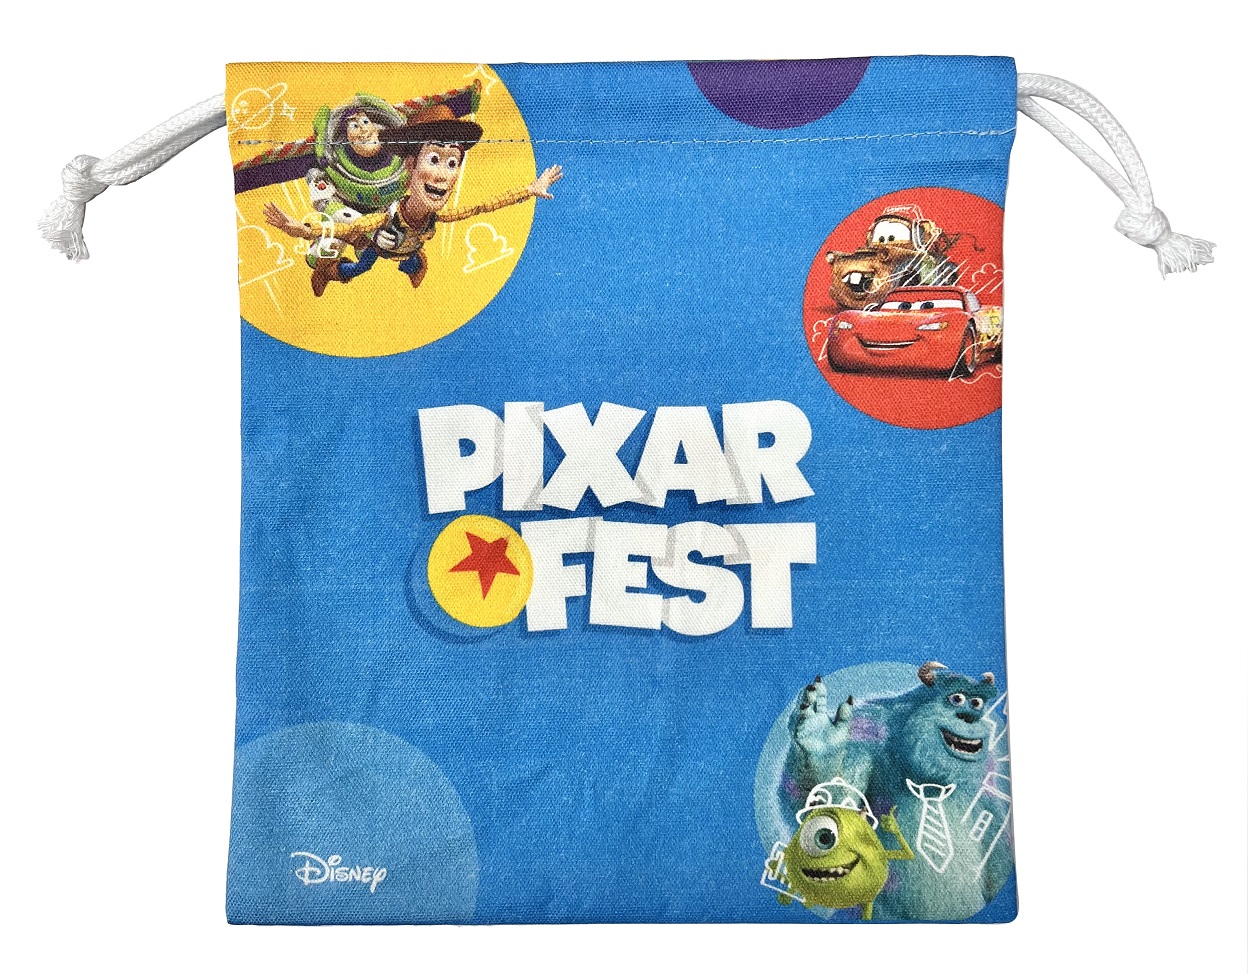 PIXAR FEST POP UP STORE by Small Planet11